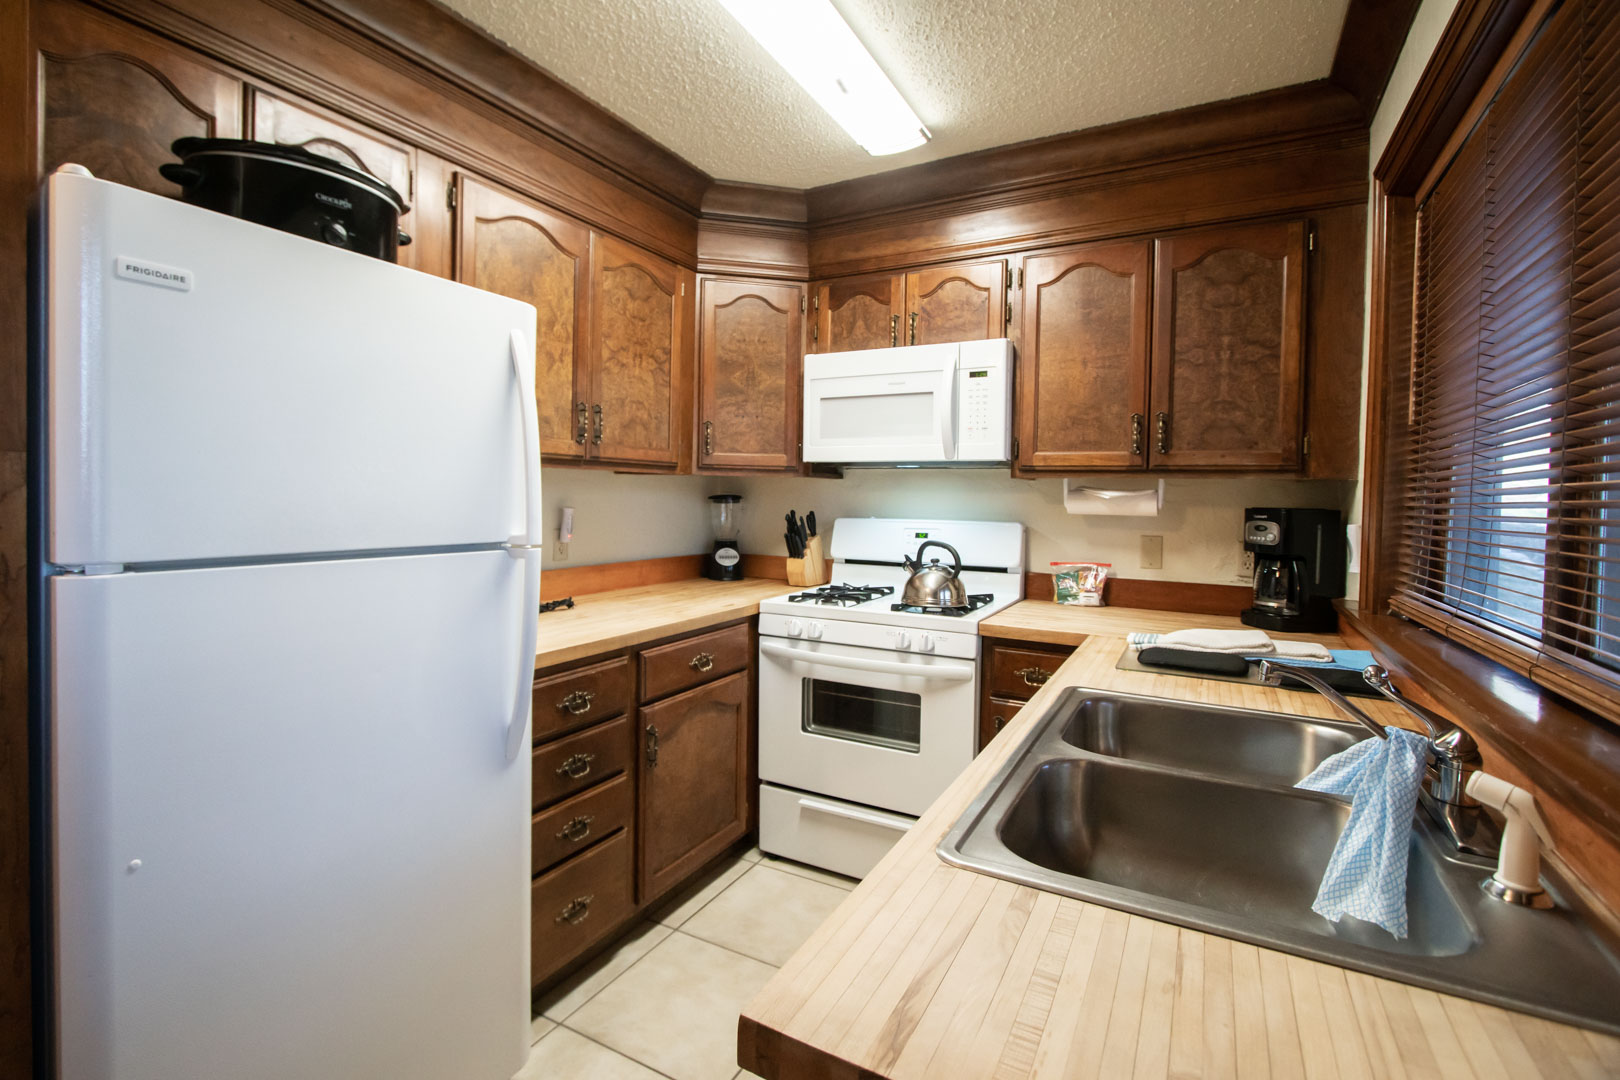 A fully equipped kitchen at VRI's Sunburst Resort in Steamboat Springs, Colorado.